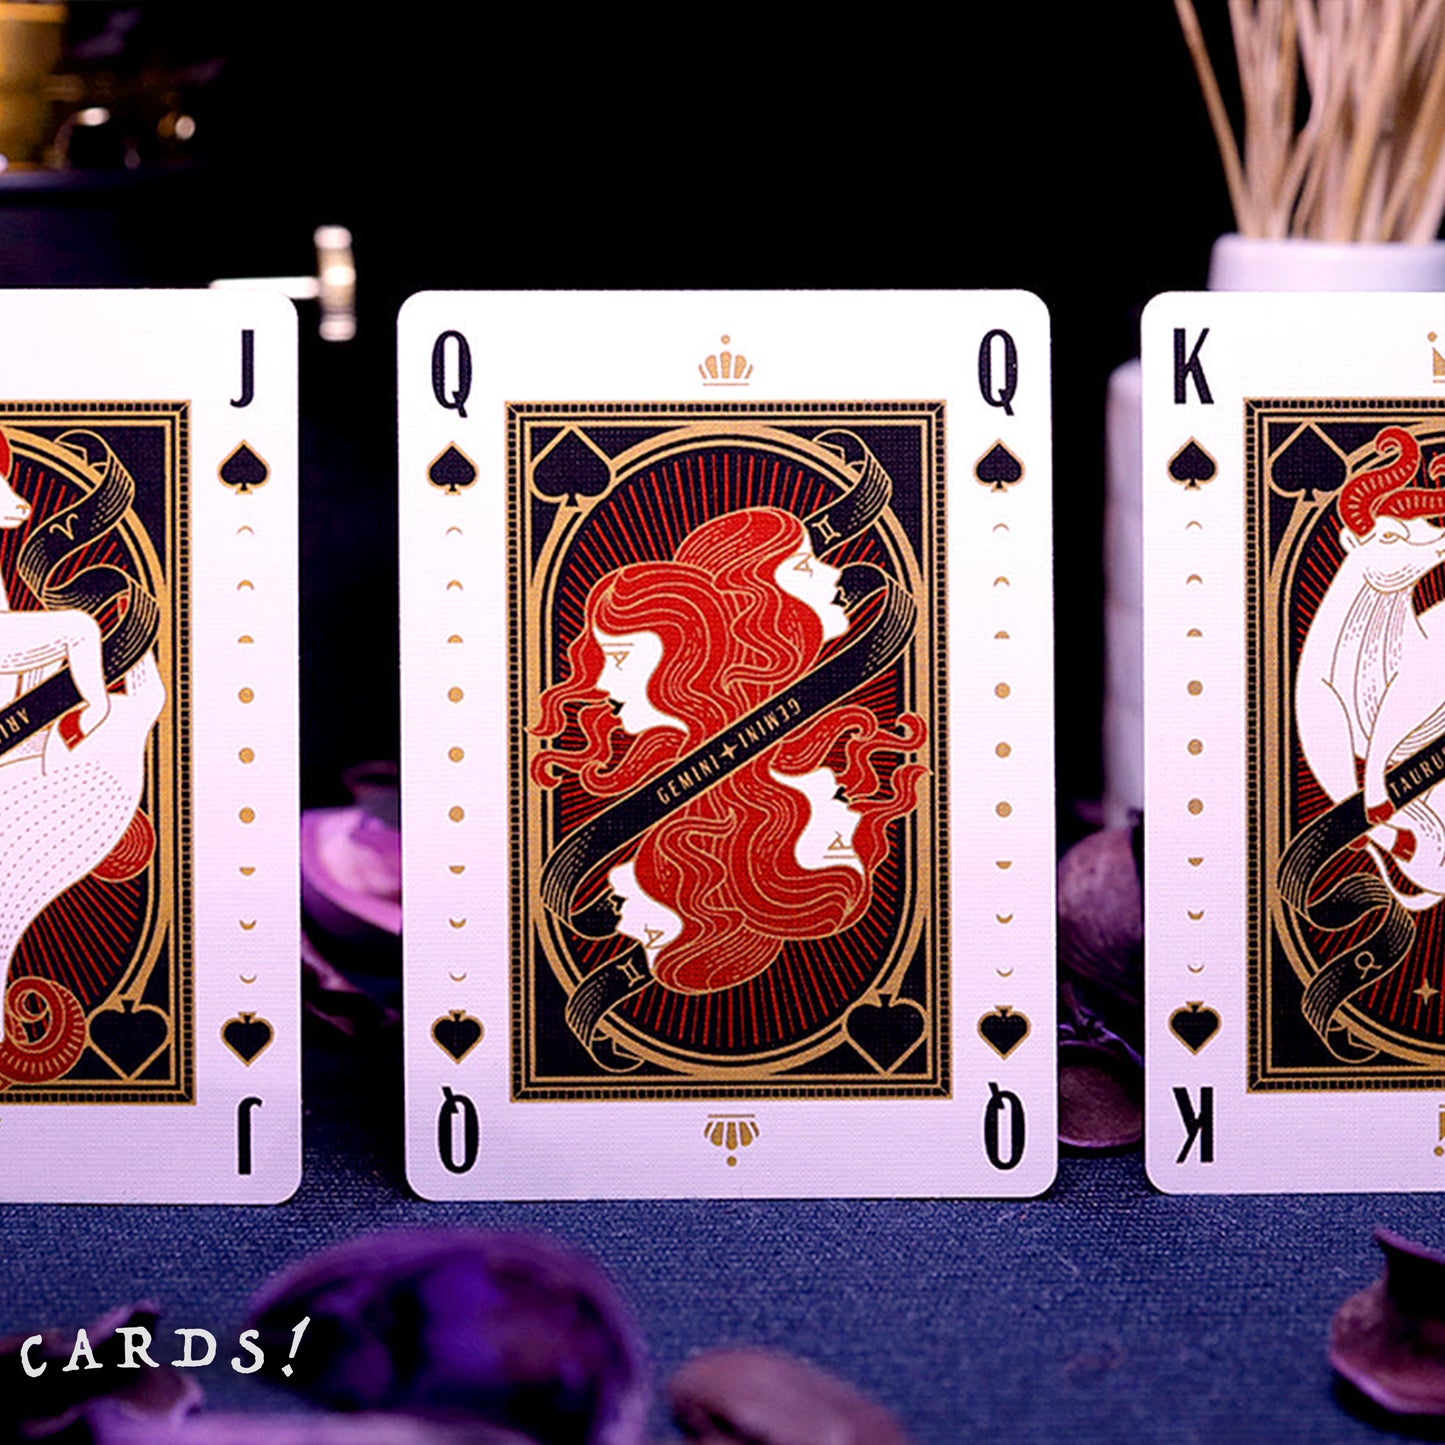 The Constellation Playing Cards